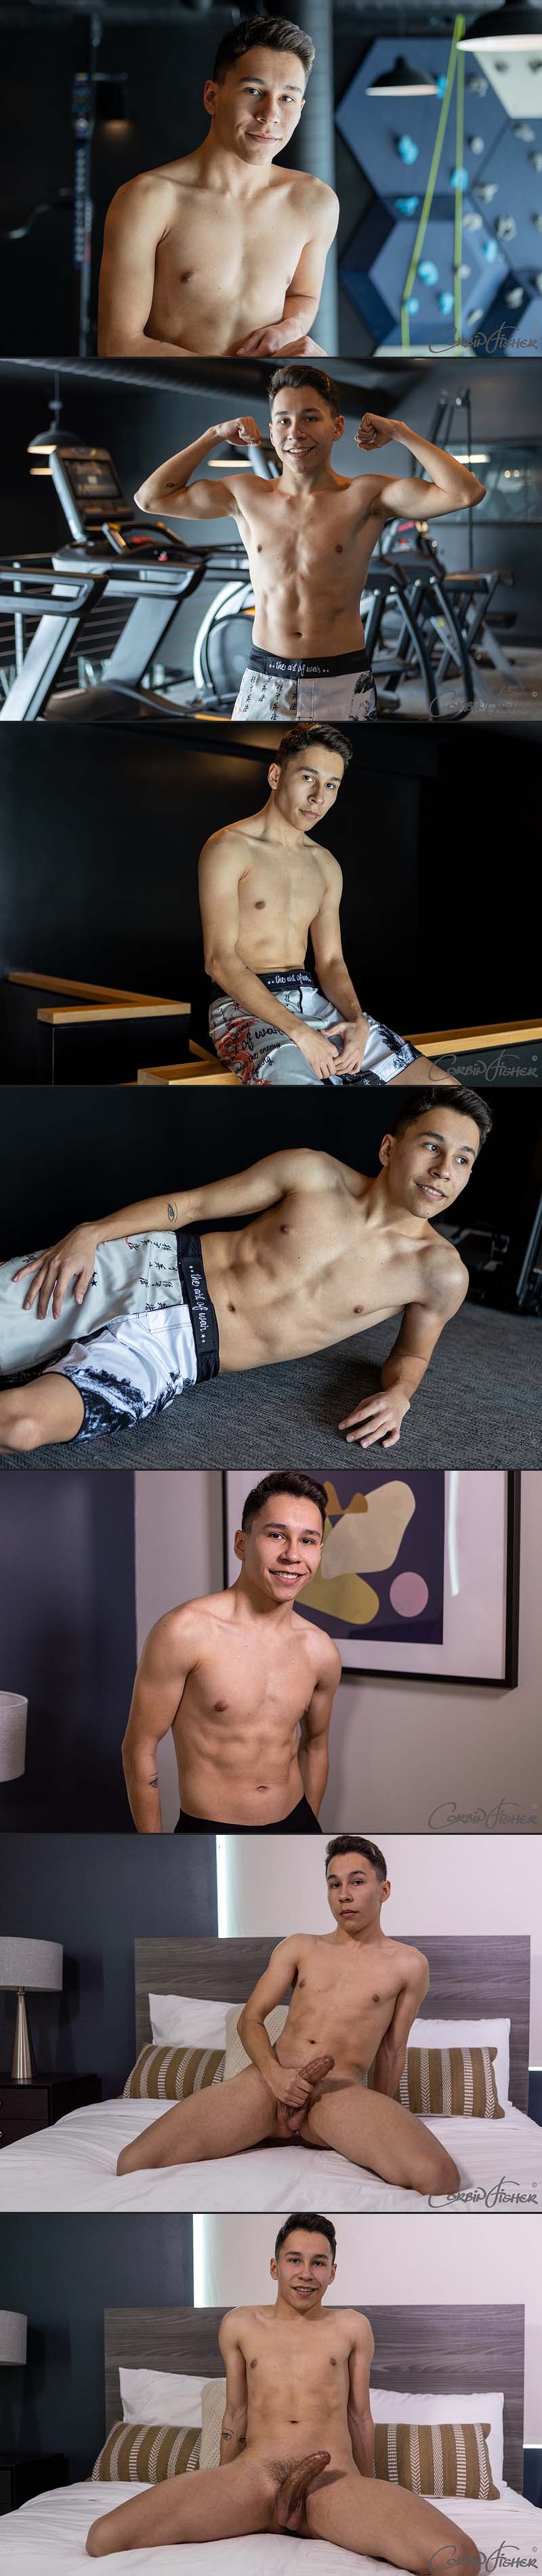 Diego's Introductory Solo at CorbinFisher